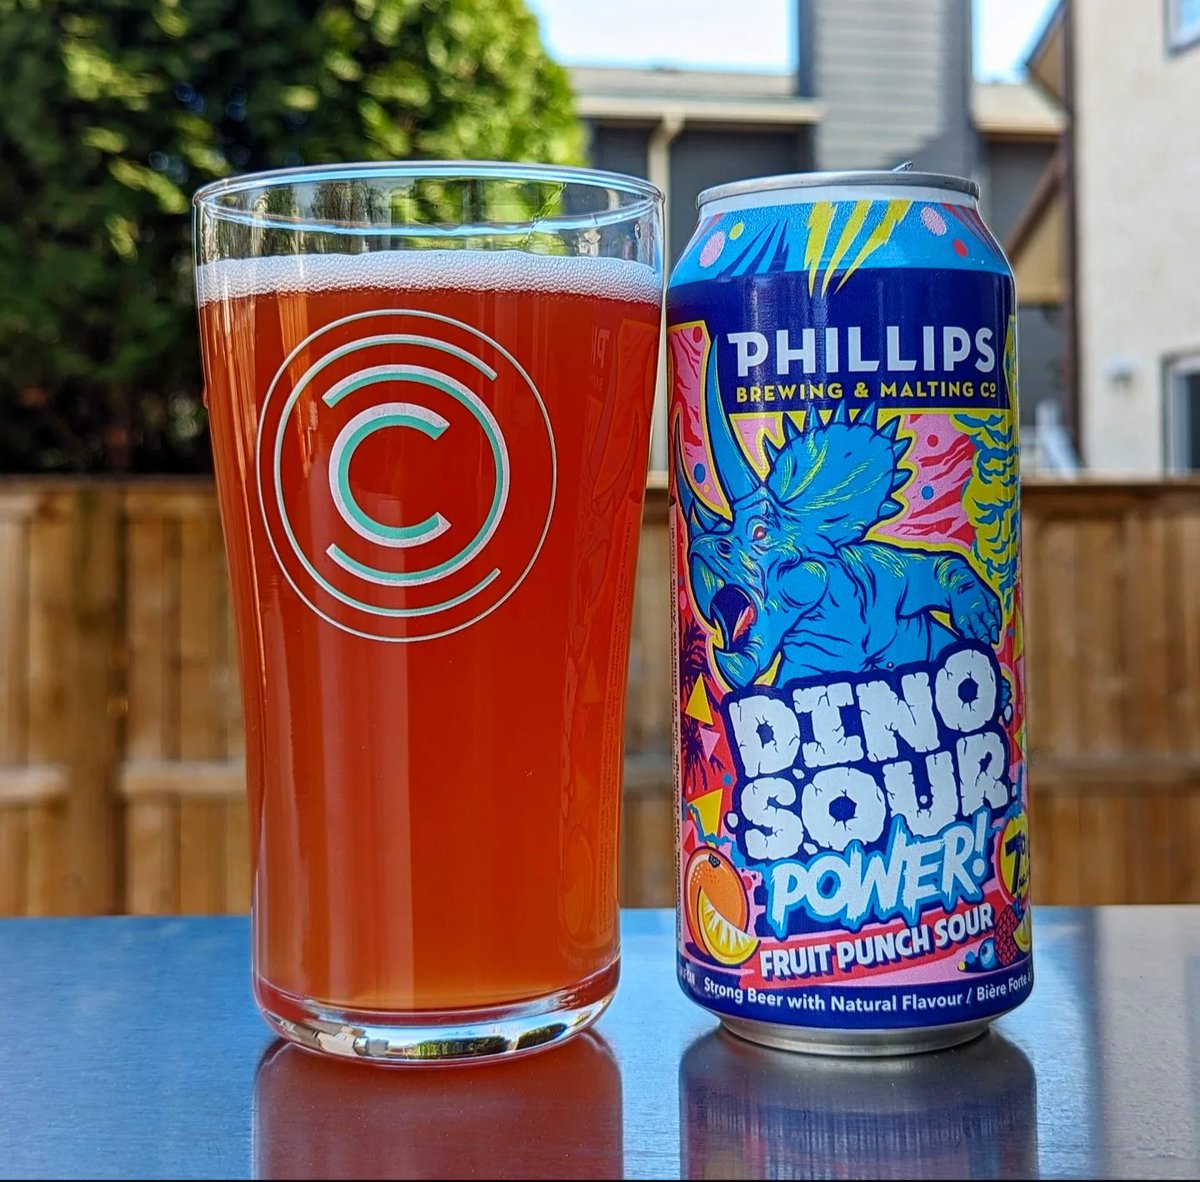 It's a beautiful Saturday. Perfect for a refreshing deck beer. @phillipsbeer Dino Sour Power Fruit Punch Sour hits the spot! 
.
.
#beer #beerporn